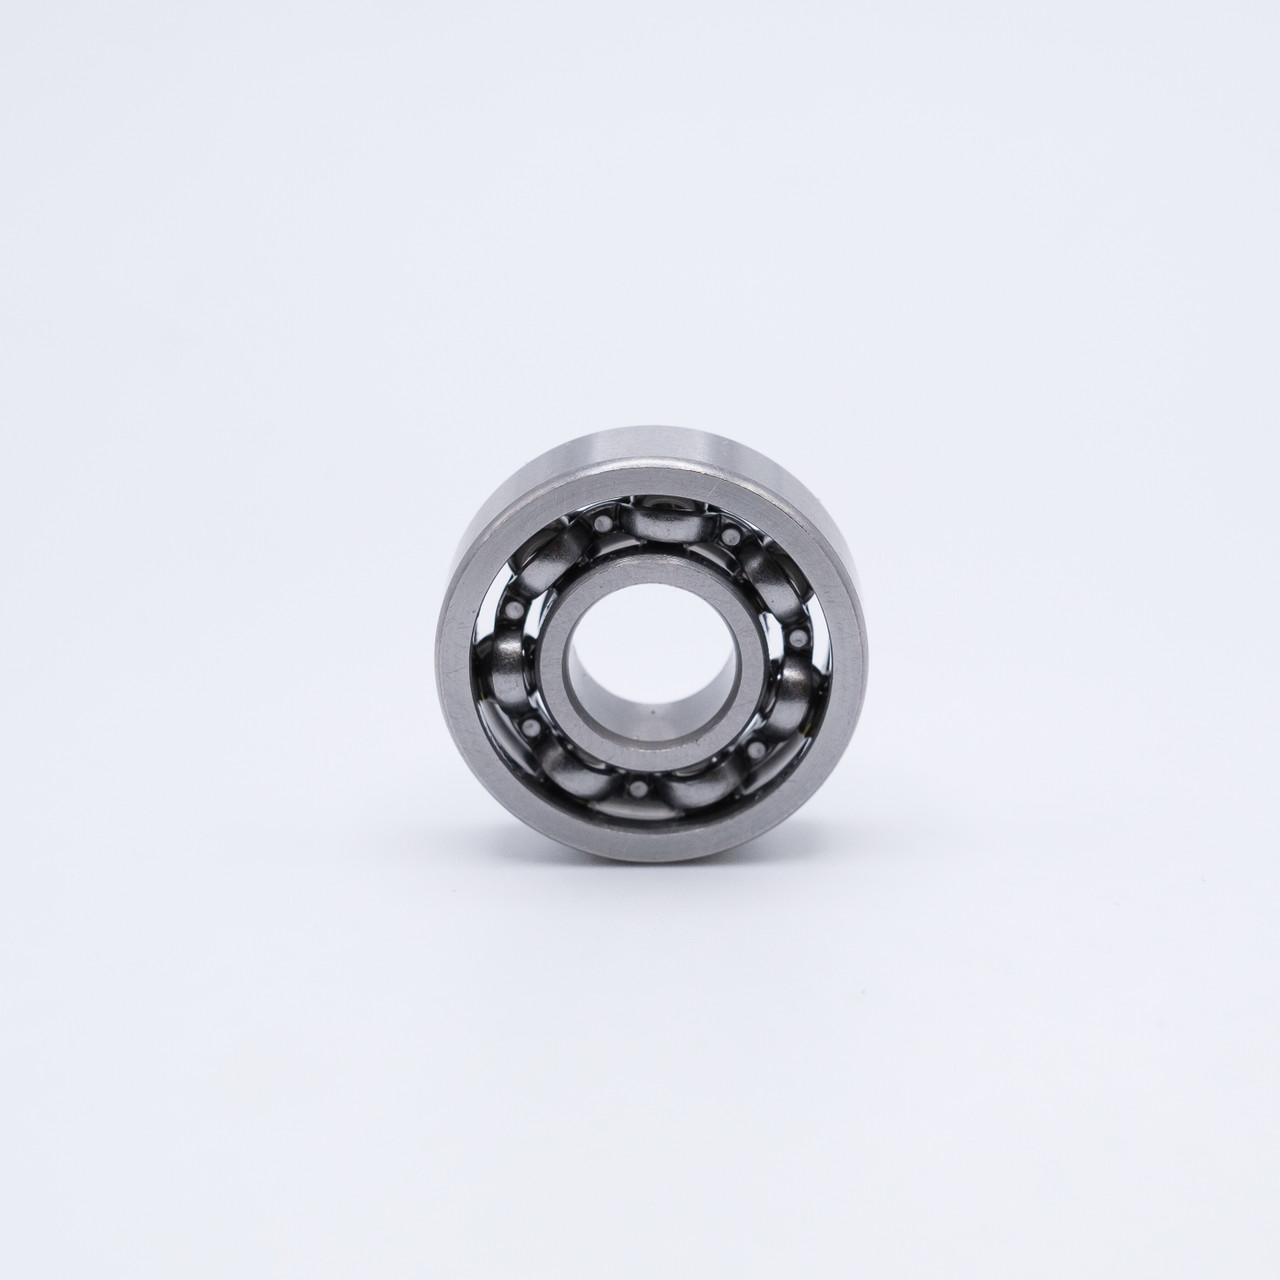 6201 Ball Bearing 12x32x10 Front View